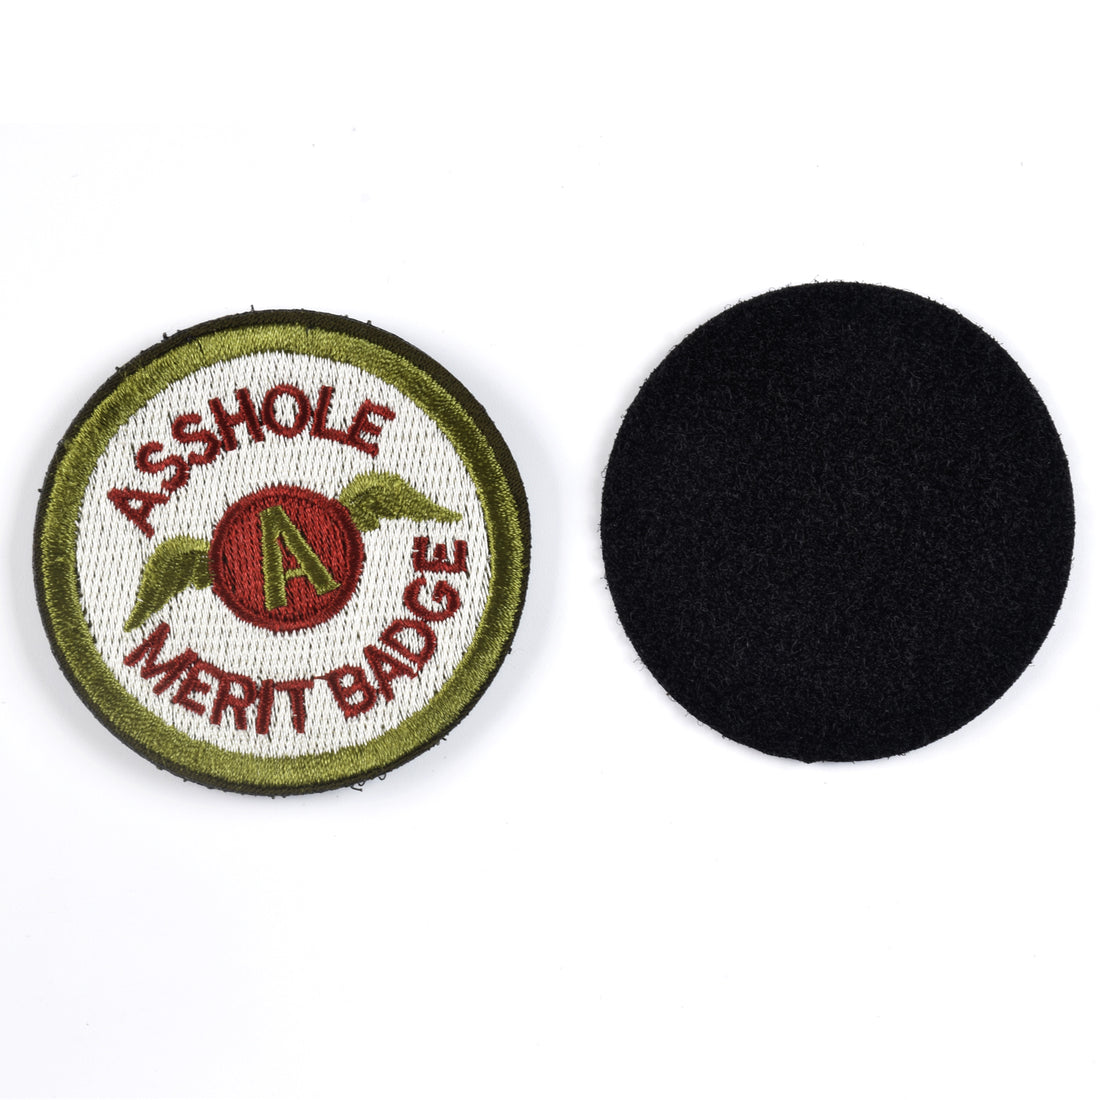 2 Pieces Asshole Merit Badge Morale Patch, Funny Tactical Military Morale Patch Hook & Loop, Green